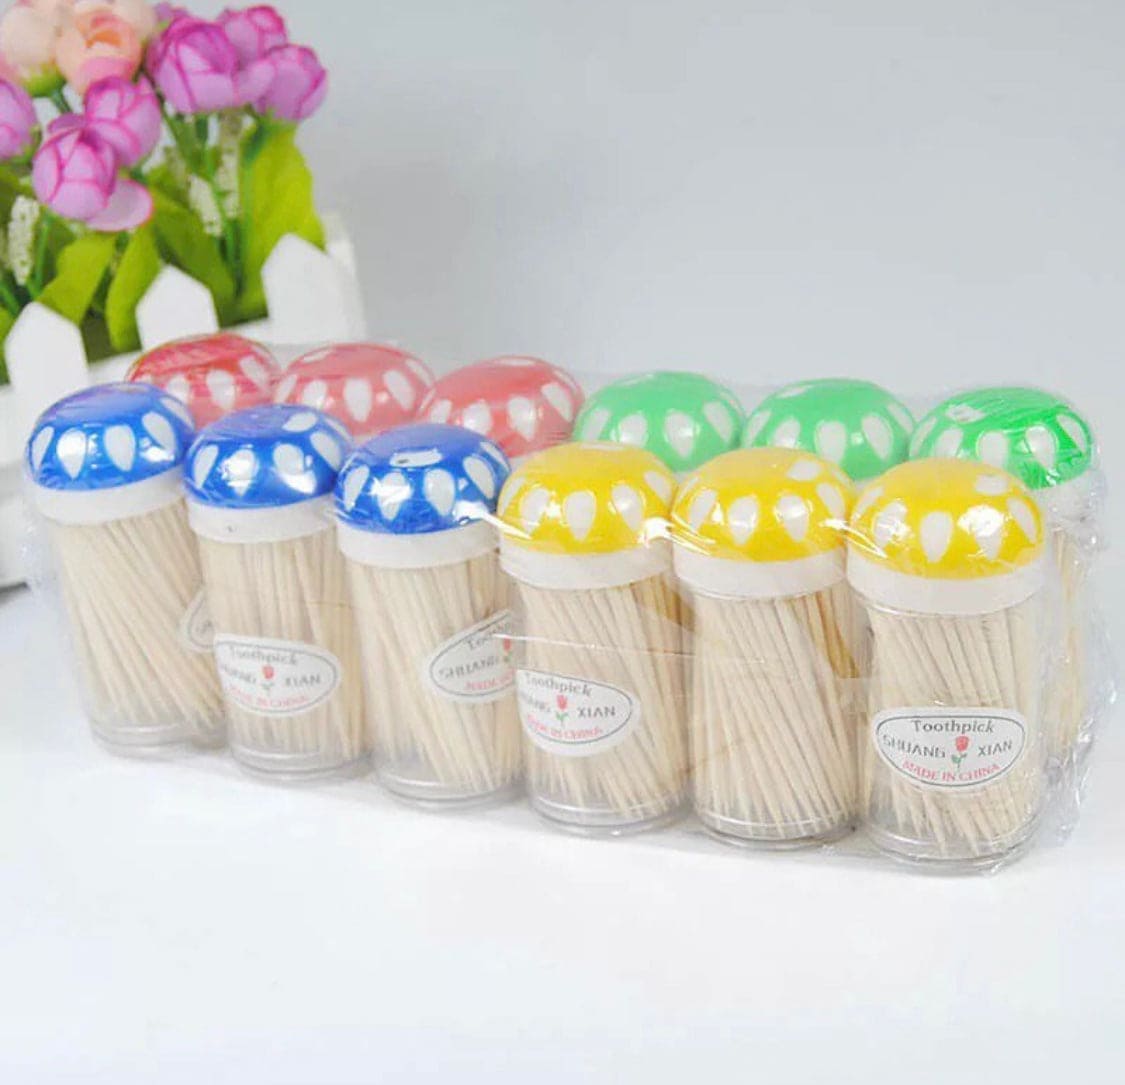 150 Pcs Bamboo Stick, Wedding Festival Party Decorations Disposable Fruit Sticks Natural Bamboo Portable